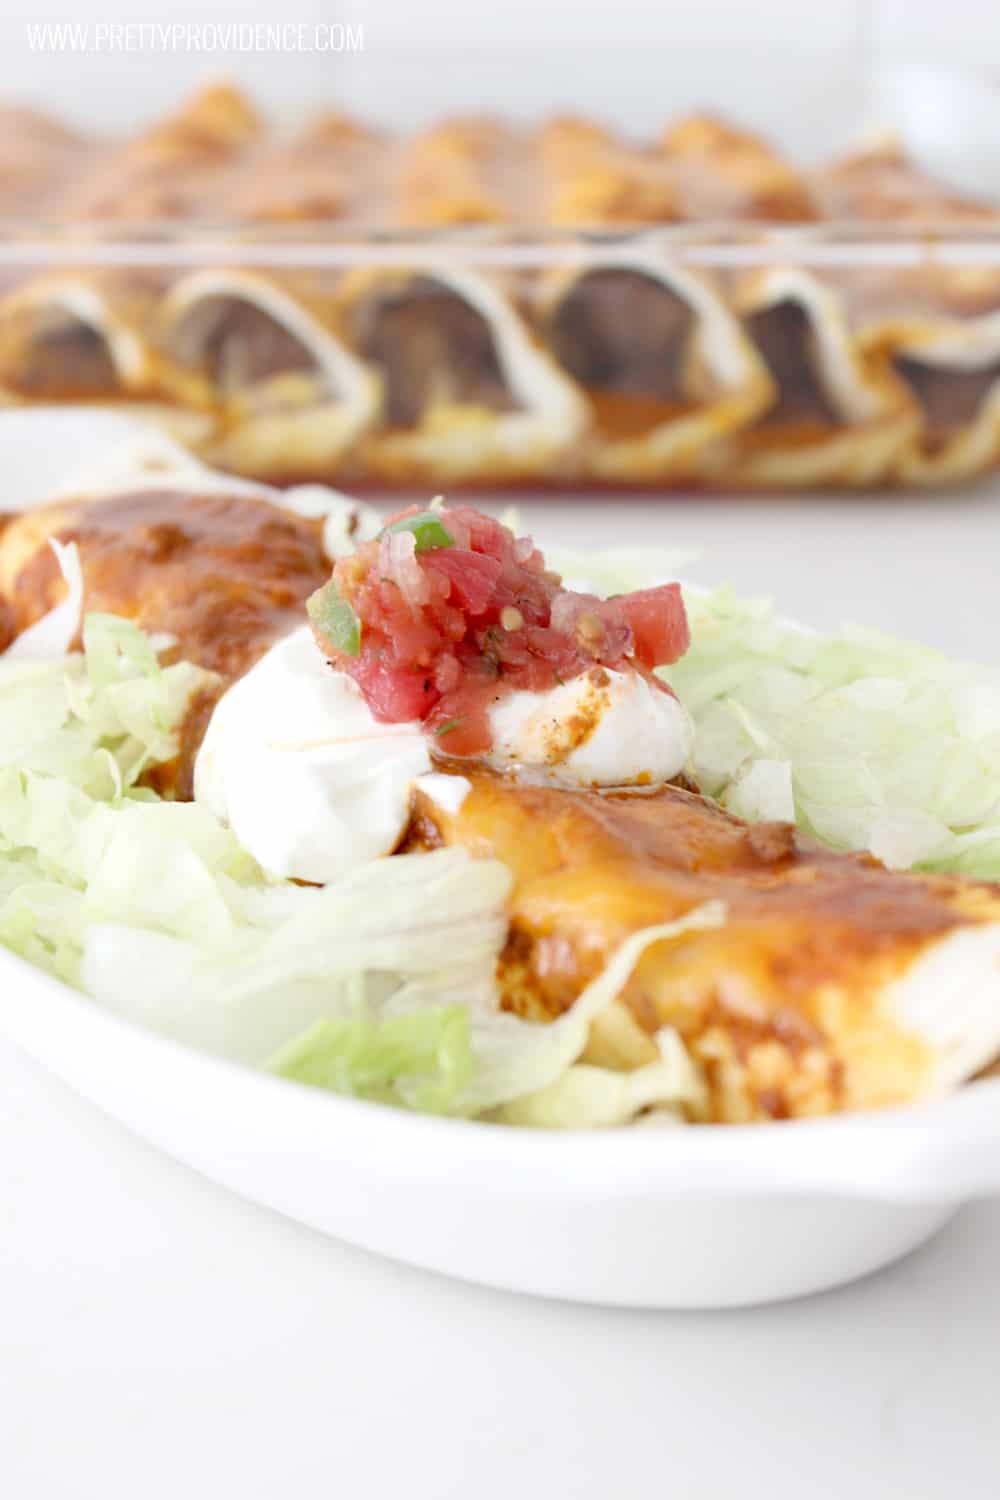 Okay these beef enchiladas are so easy! Just through the stuff in the crockpot in the morning then all you have to do is scoop some of the meat mixture, add the cheese, roll up and bake a few minutes! SO easy and SO delicious! A family favorite for sure! 